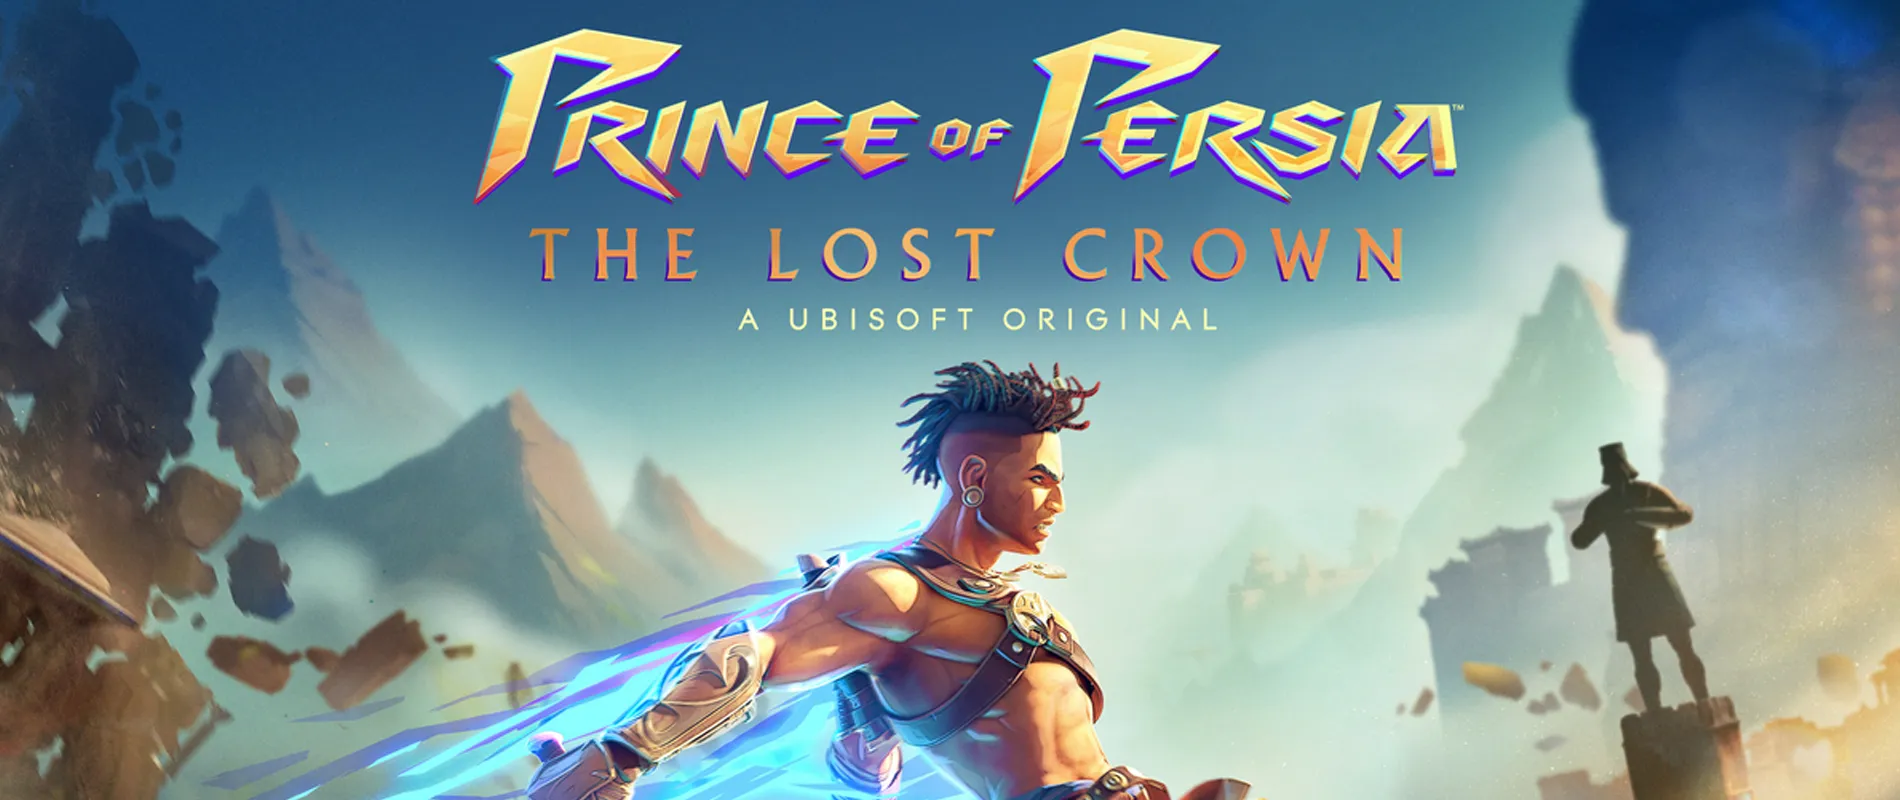 Prince of Persia The Last Crown Announced and Launching 18th January